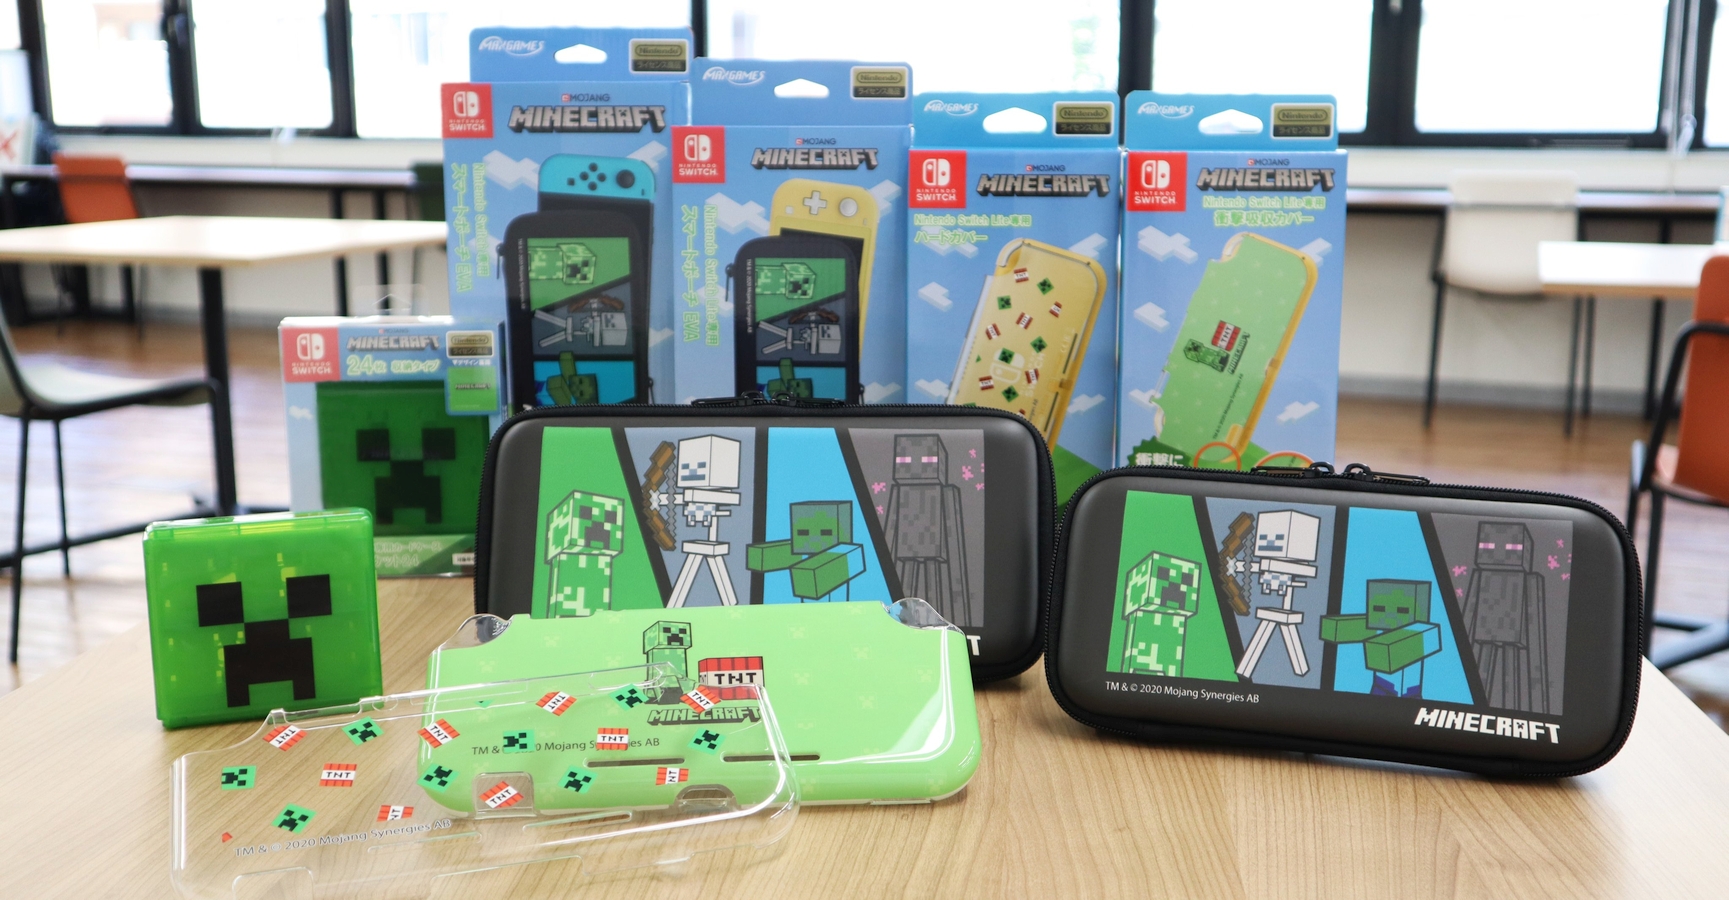 Max Games Releases Minecraft-Themed Nintendo Switch Accessories In Japan